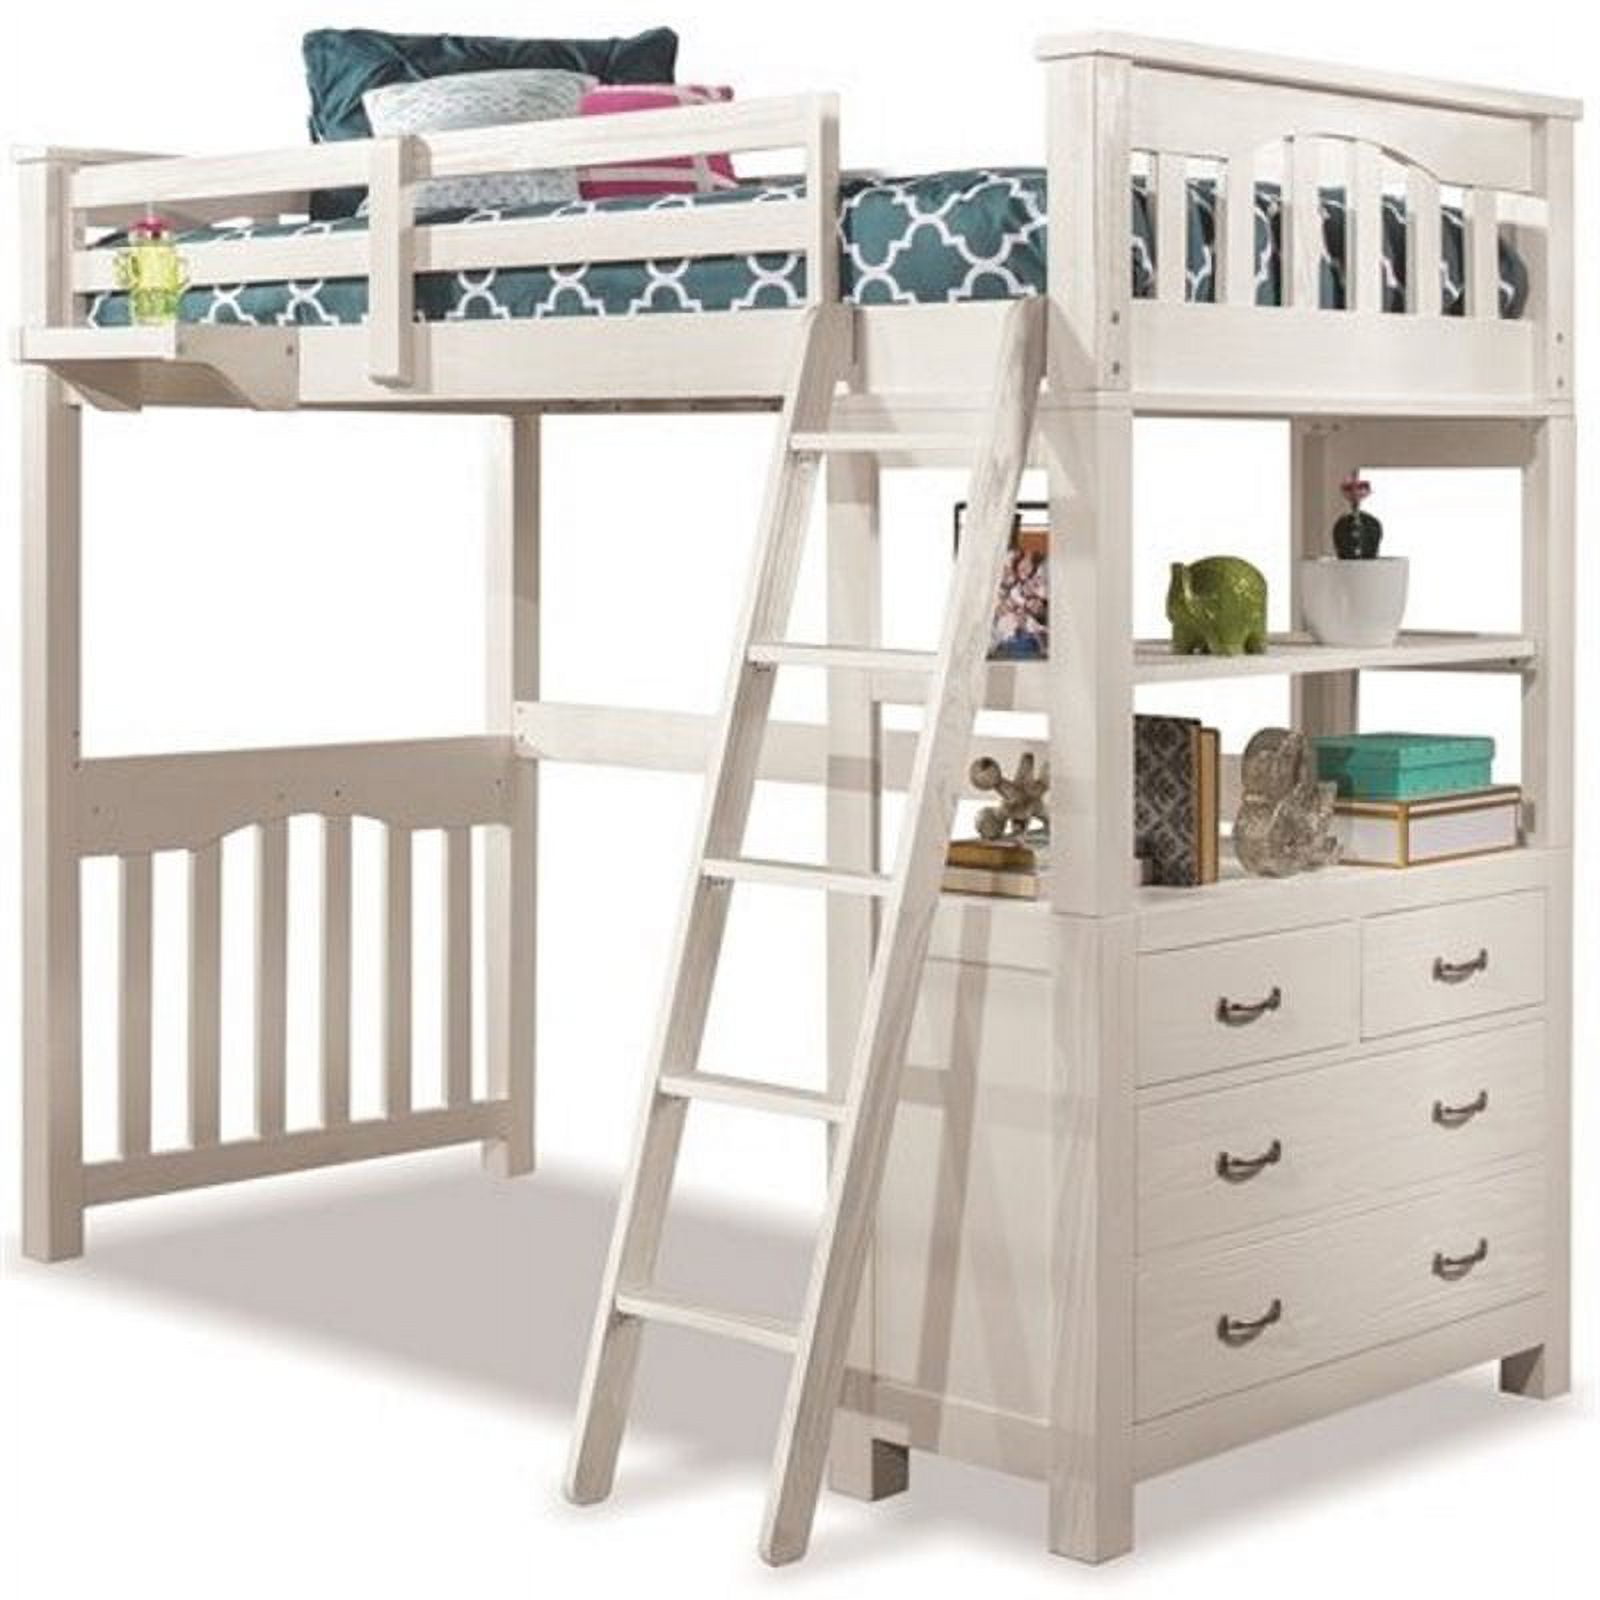 Highlands Twin Loft Bed with Hanging Nightstand in White - image 1 of 8